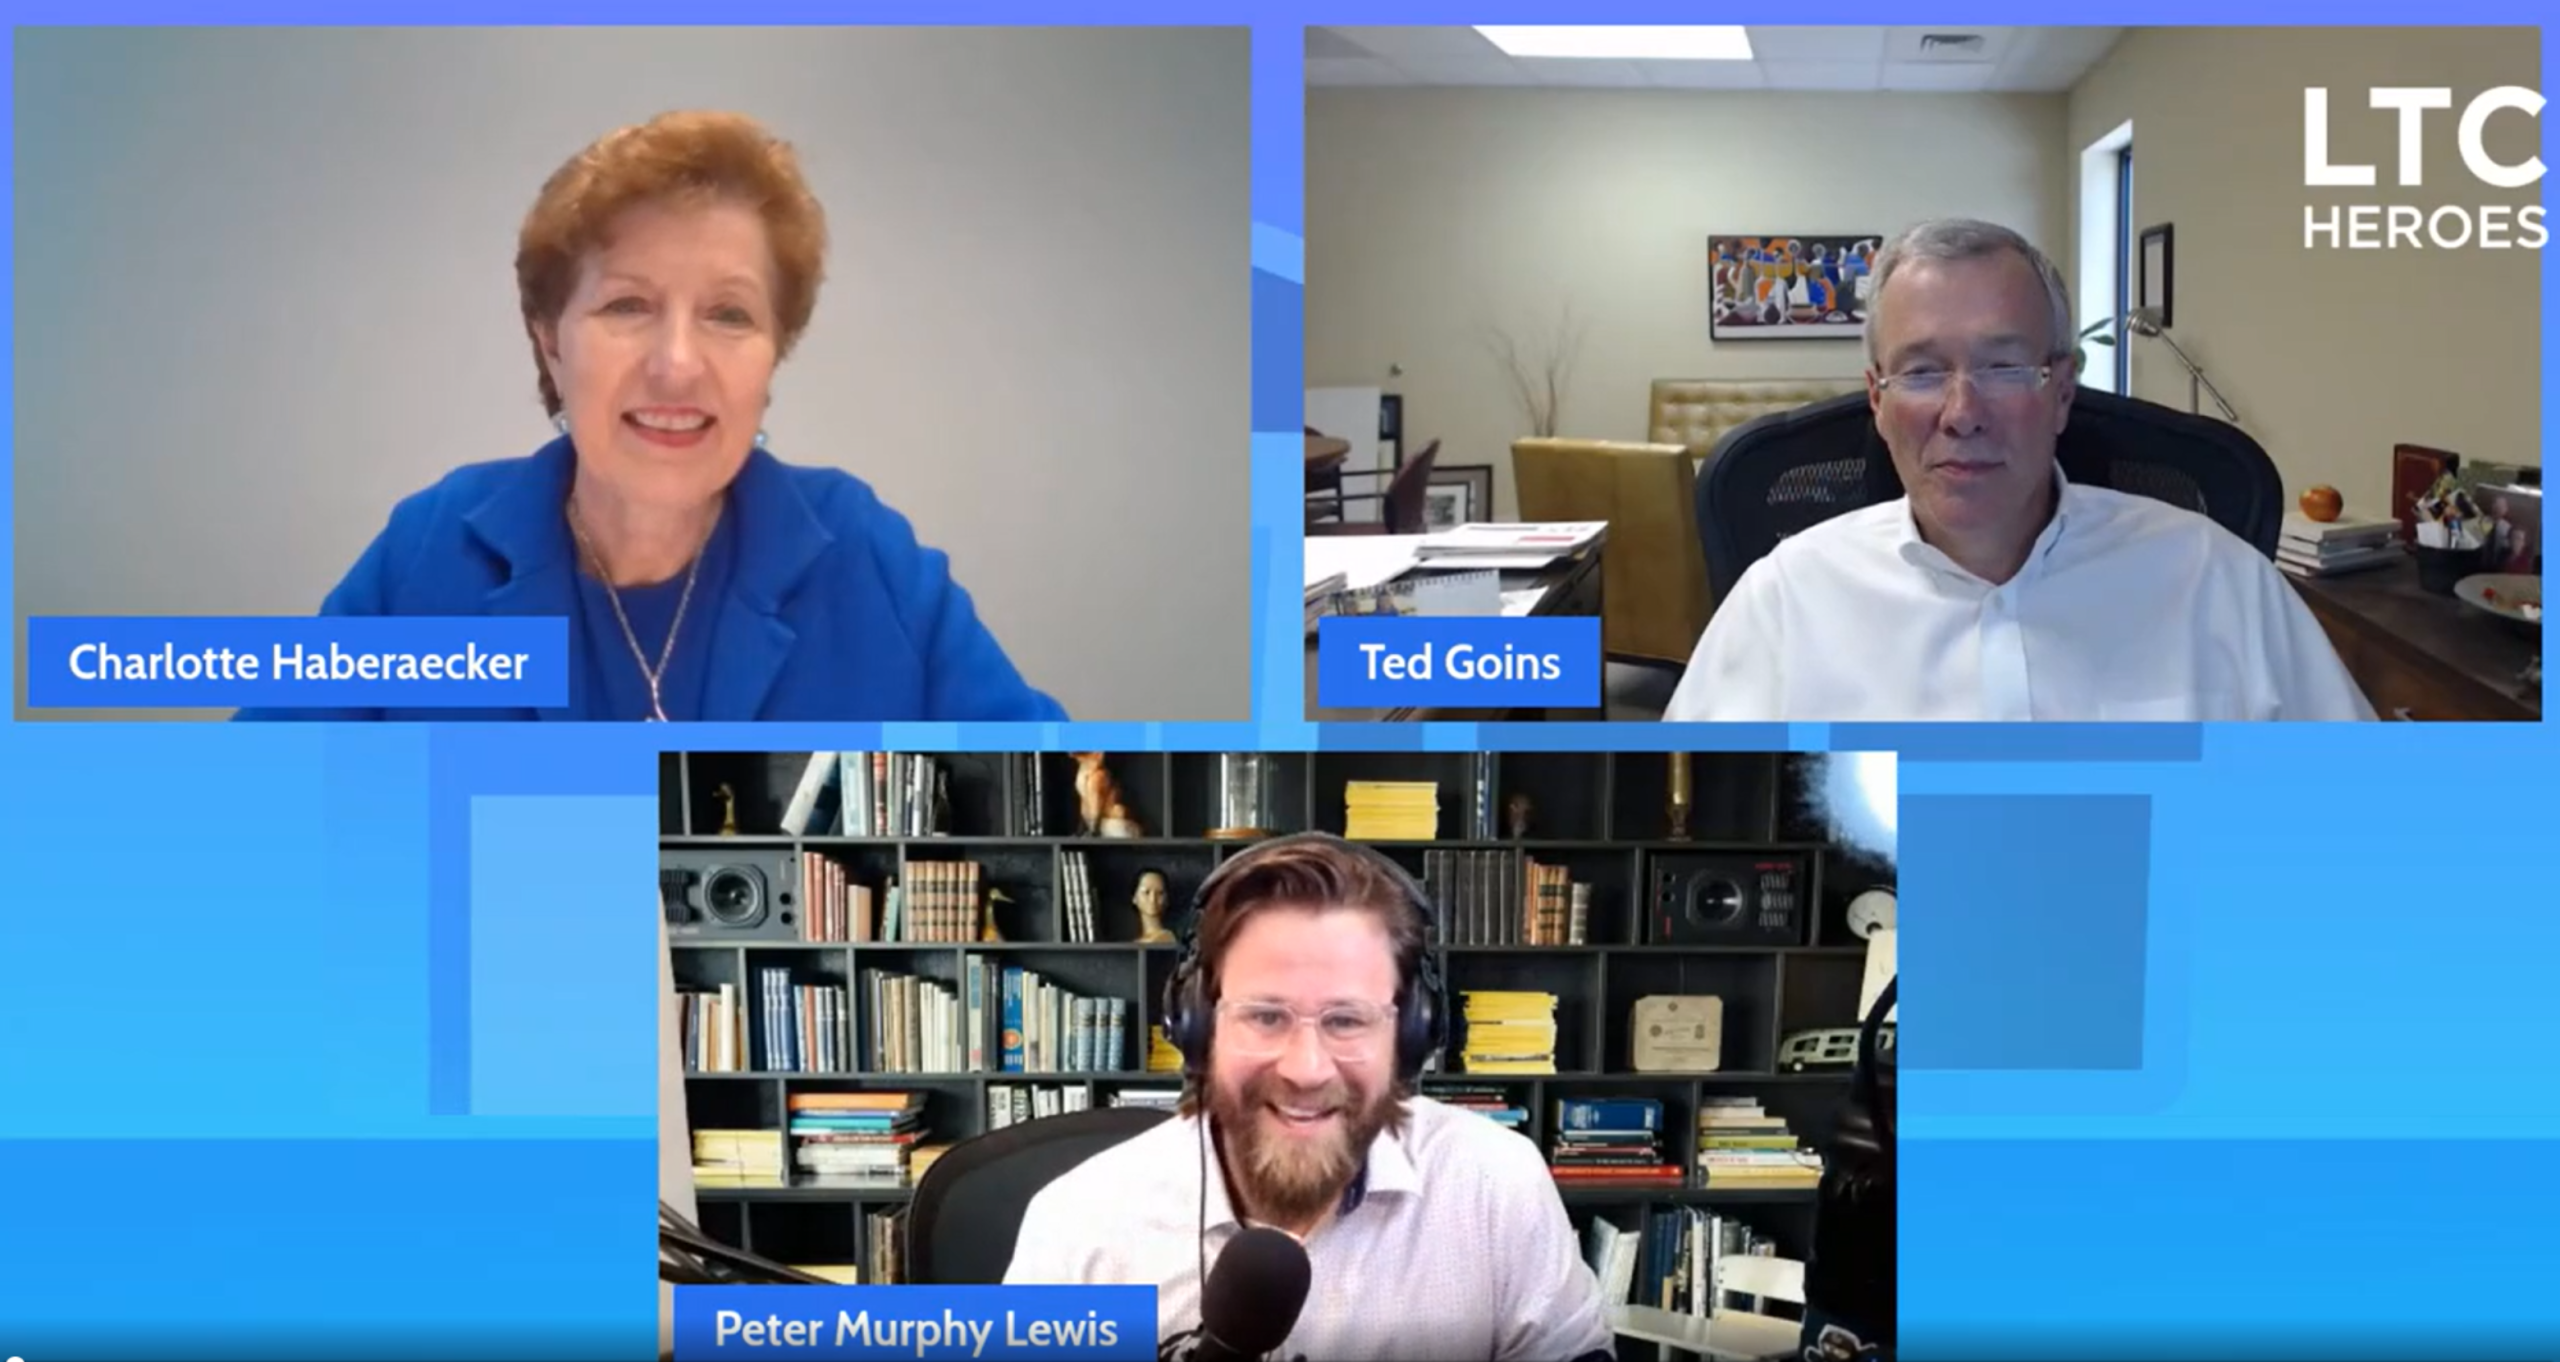 LTC Heroes Live Interview with Charlotte Haberaecker and Ted Goins